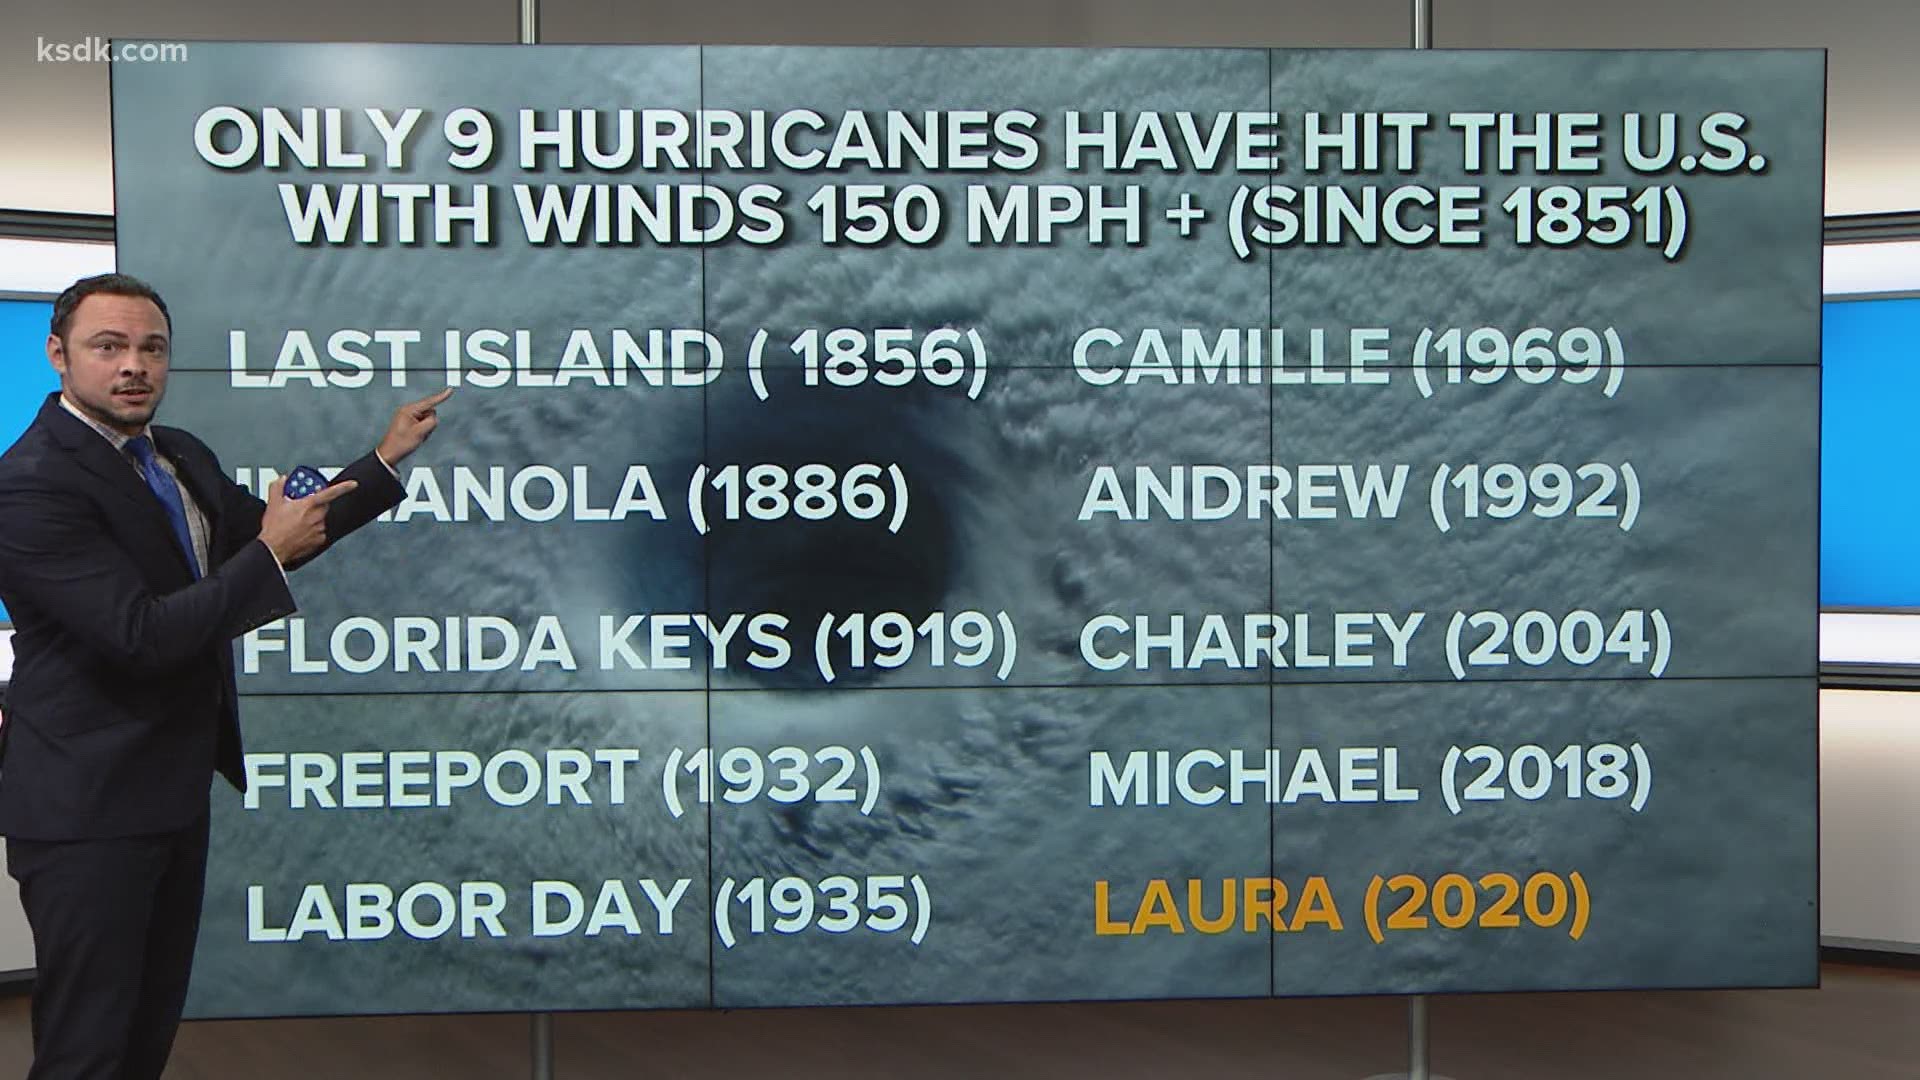 Laura will go down in history as one of the strongest hurricanes to ever hit the U.S.